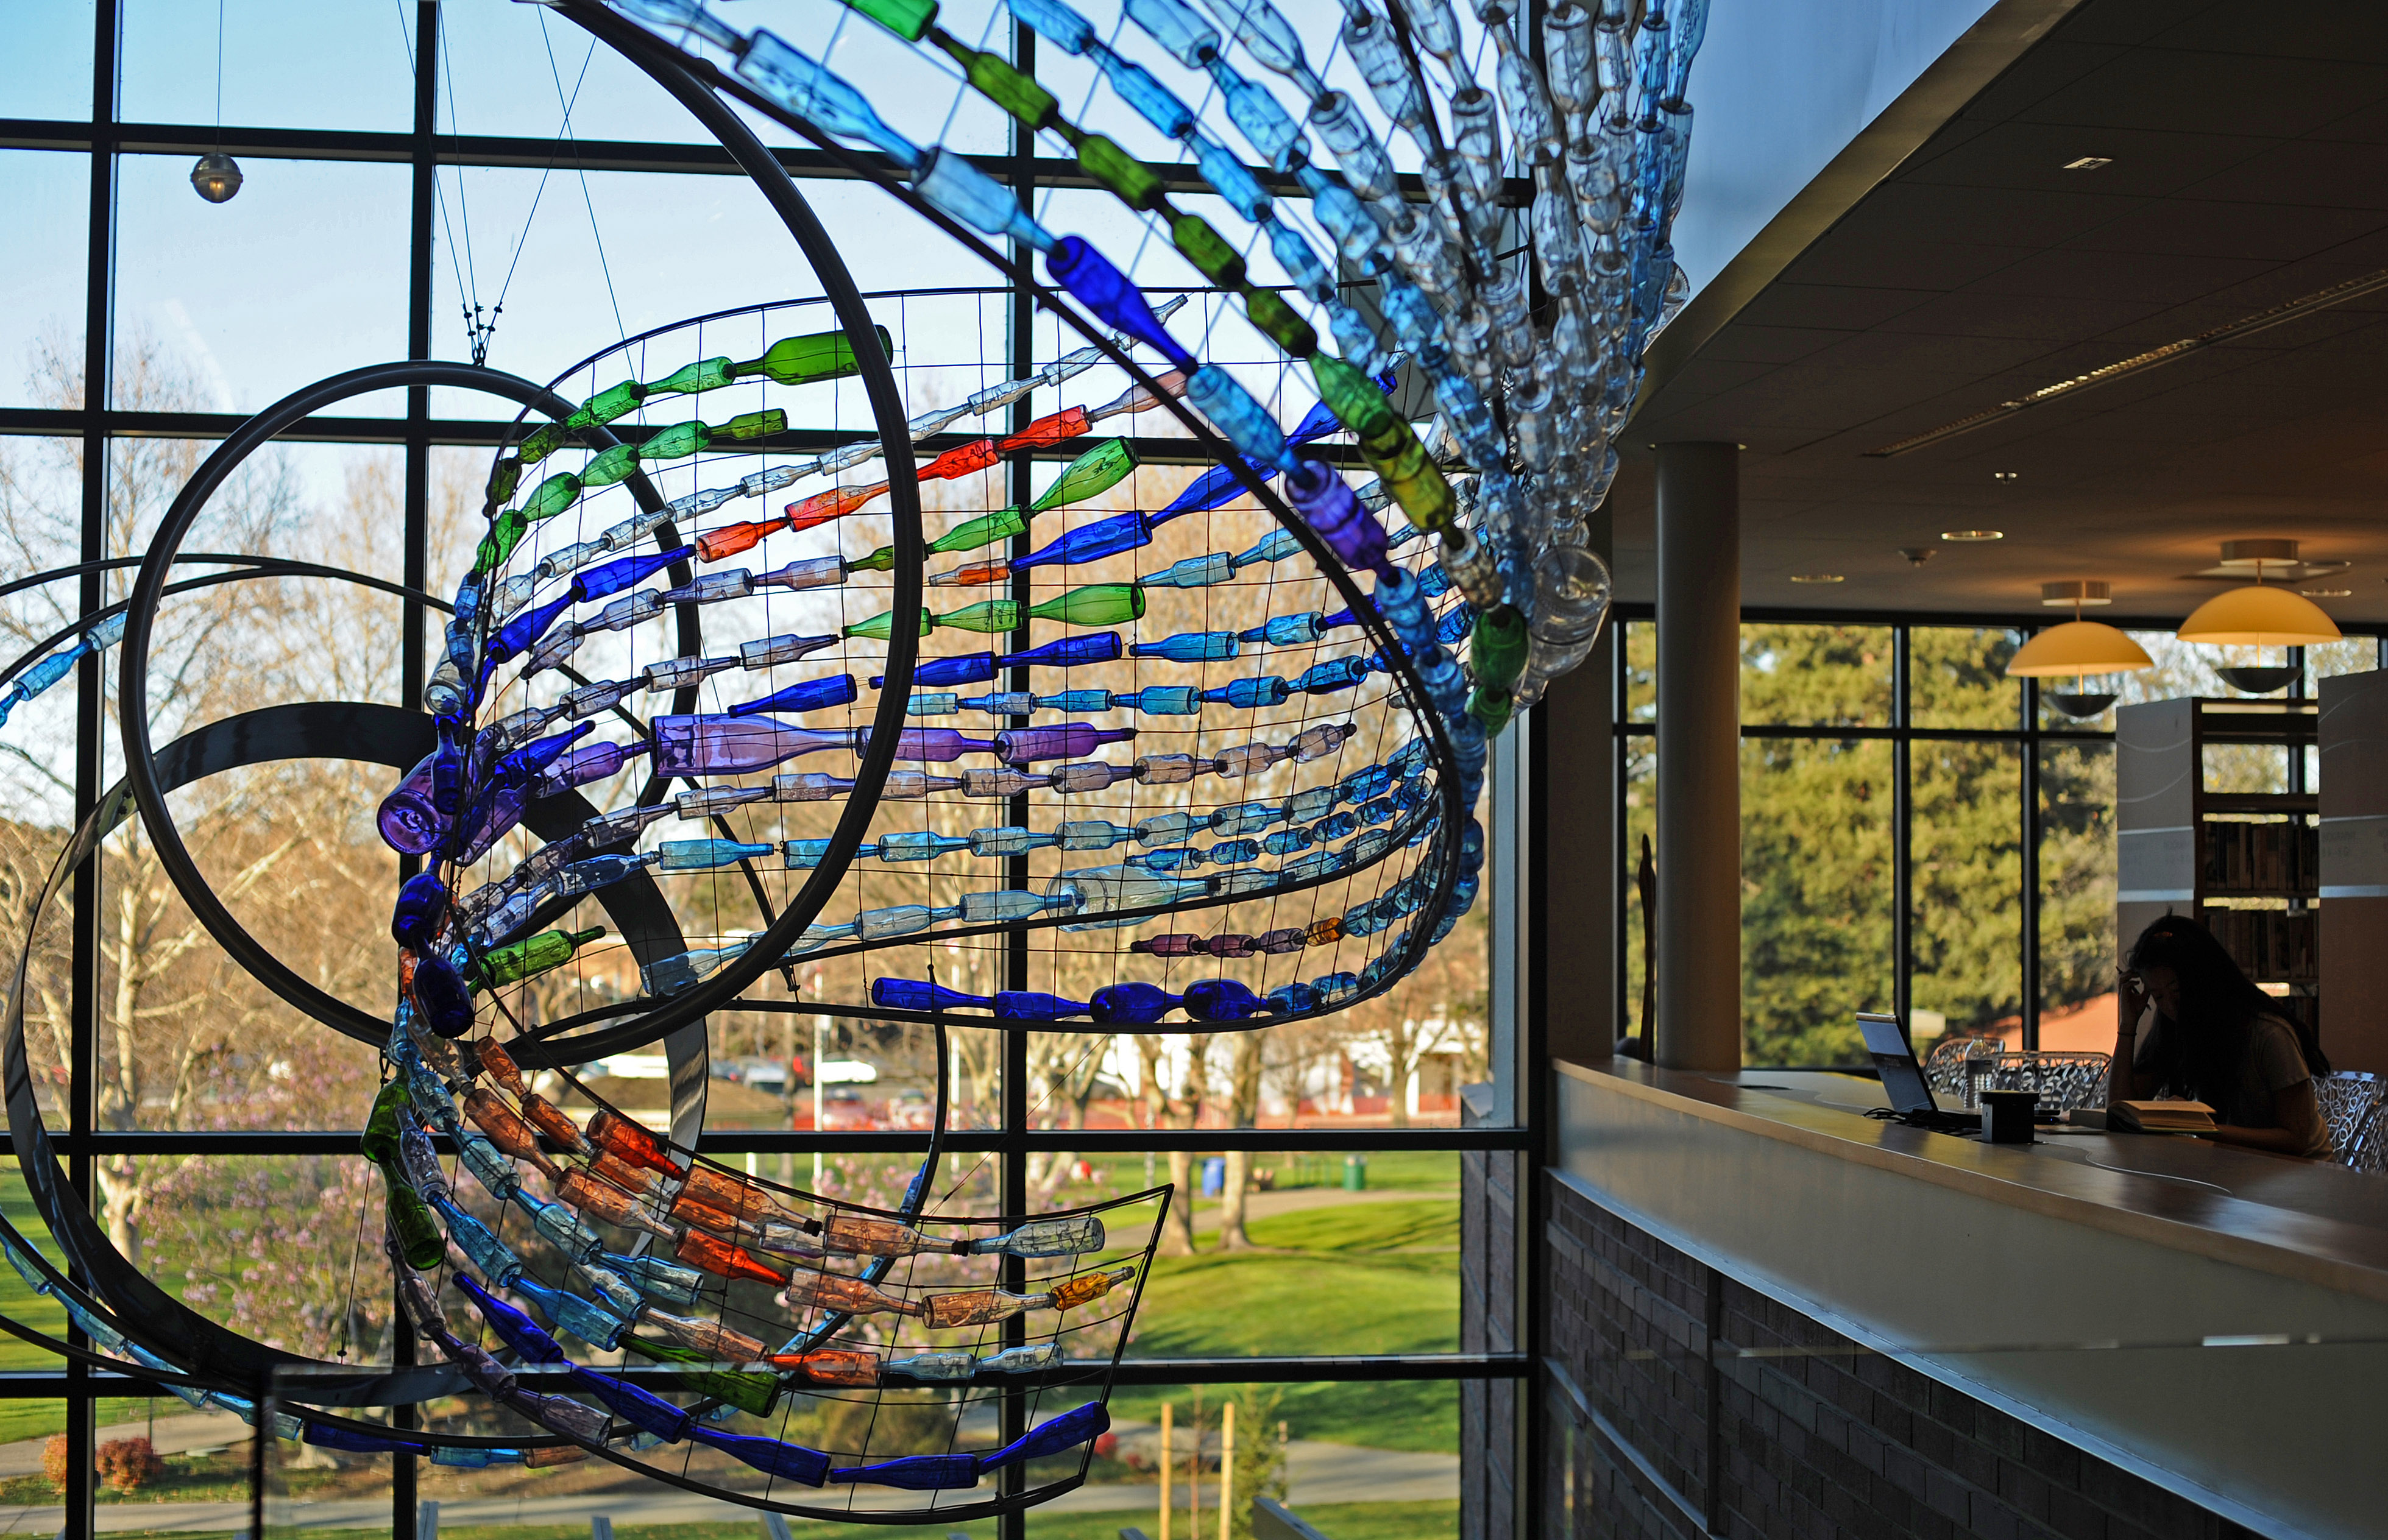 Journey of a Bottle (2011), a Marta Thoma Hall sculpture at the Walnut Creek Public Library